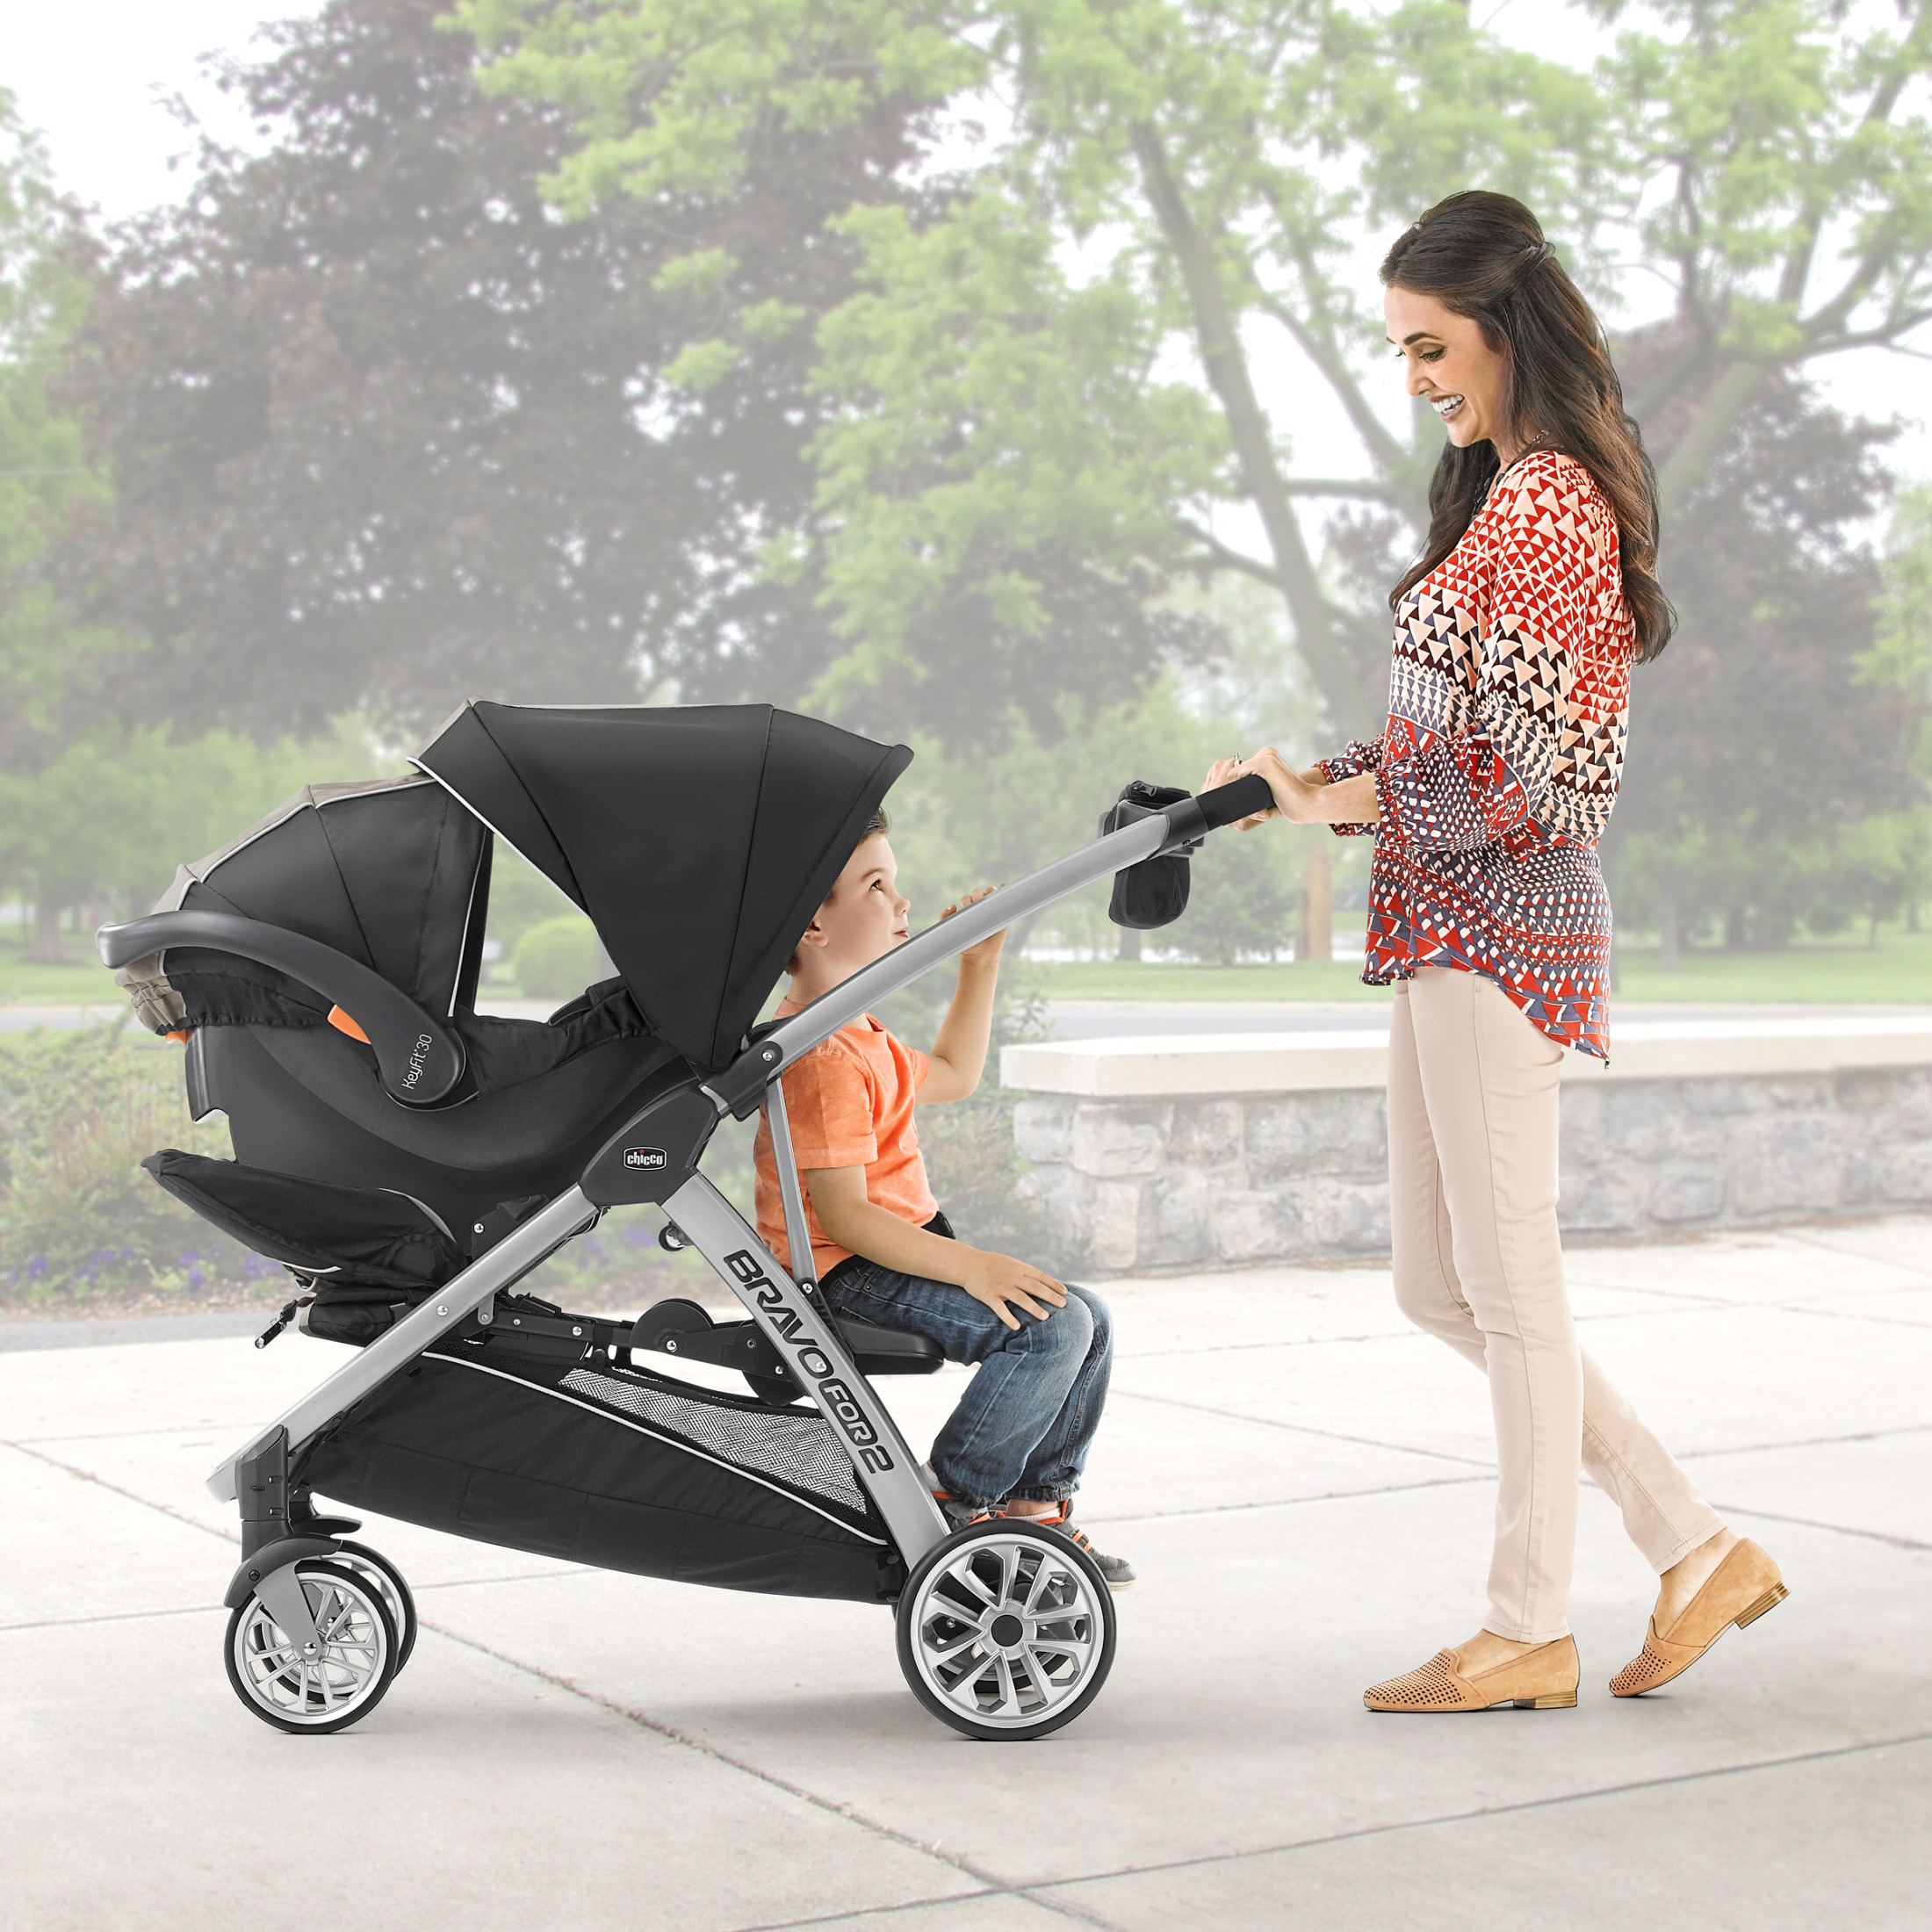 Chicco BravoFor2 Standing/Sitting Double Stroller - Iron (Black/Grey) - image 3 of 11